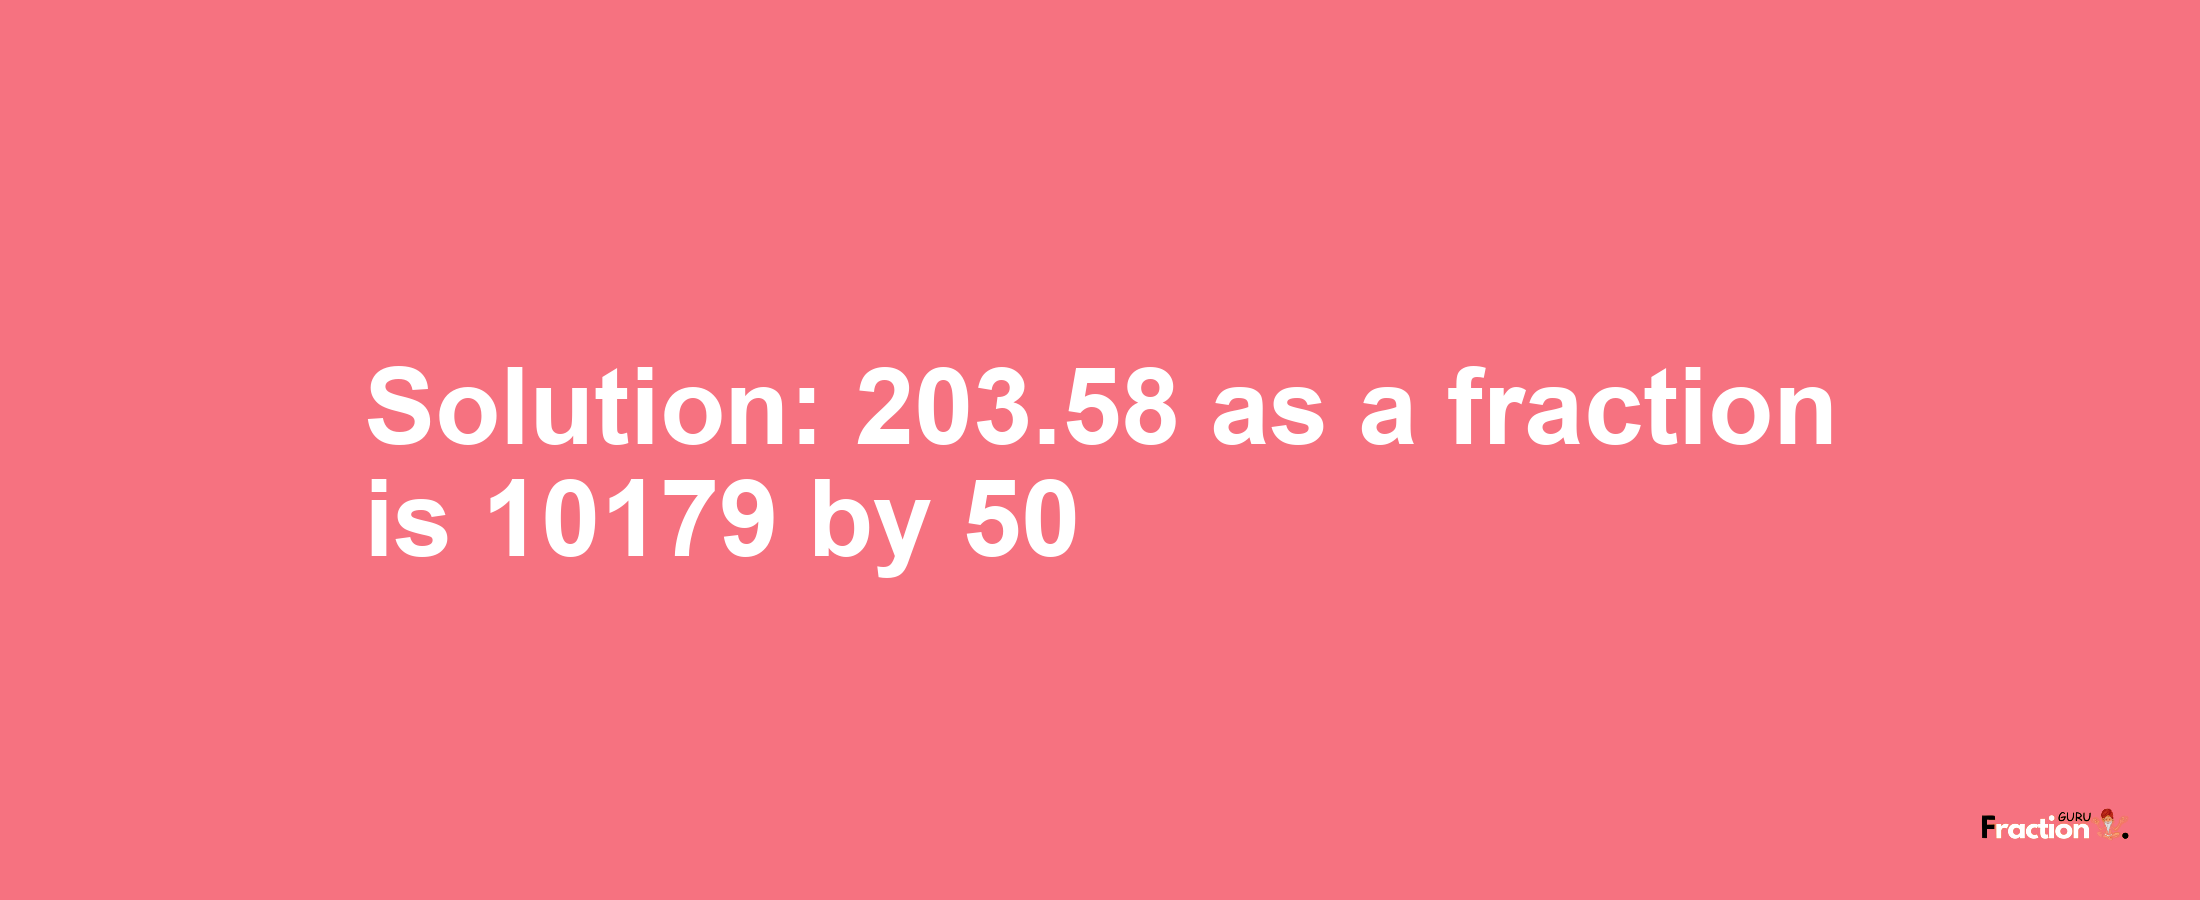 Solution:203.58 as a fraction is 10179/50